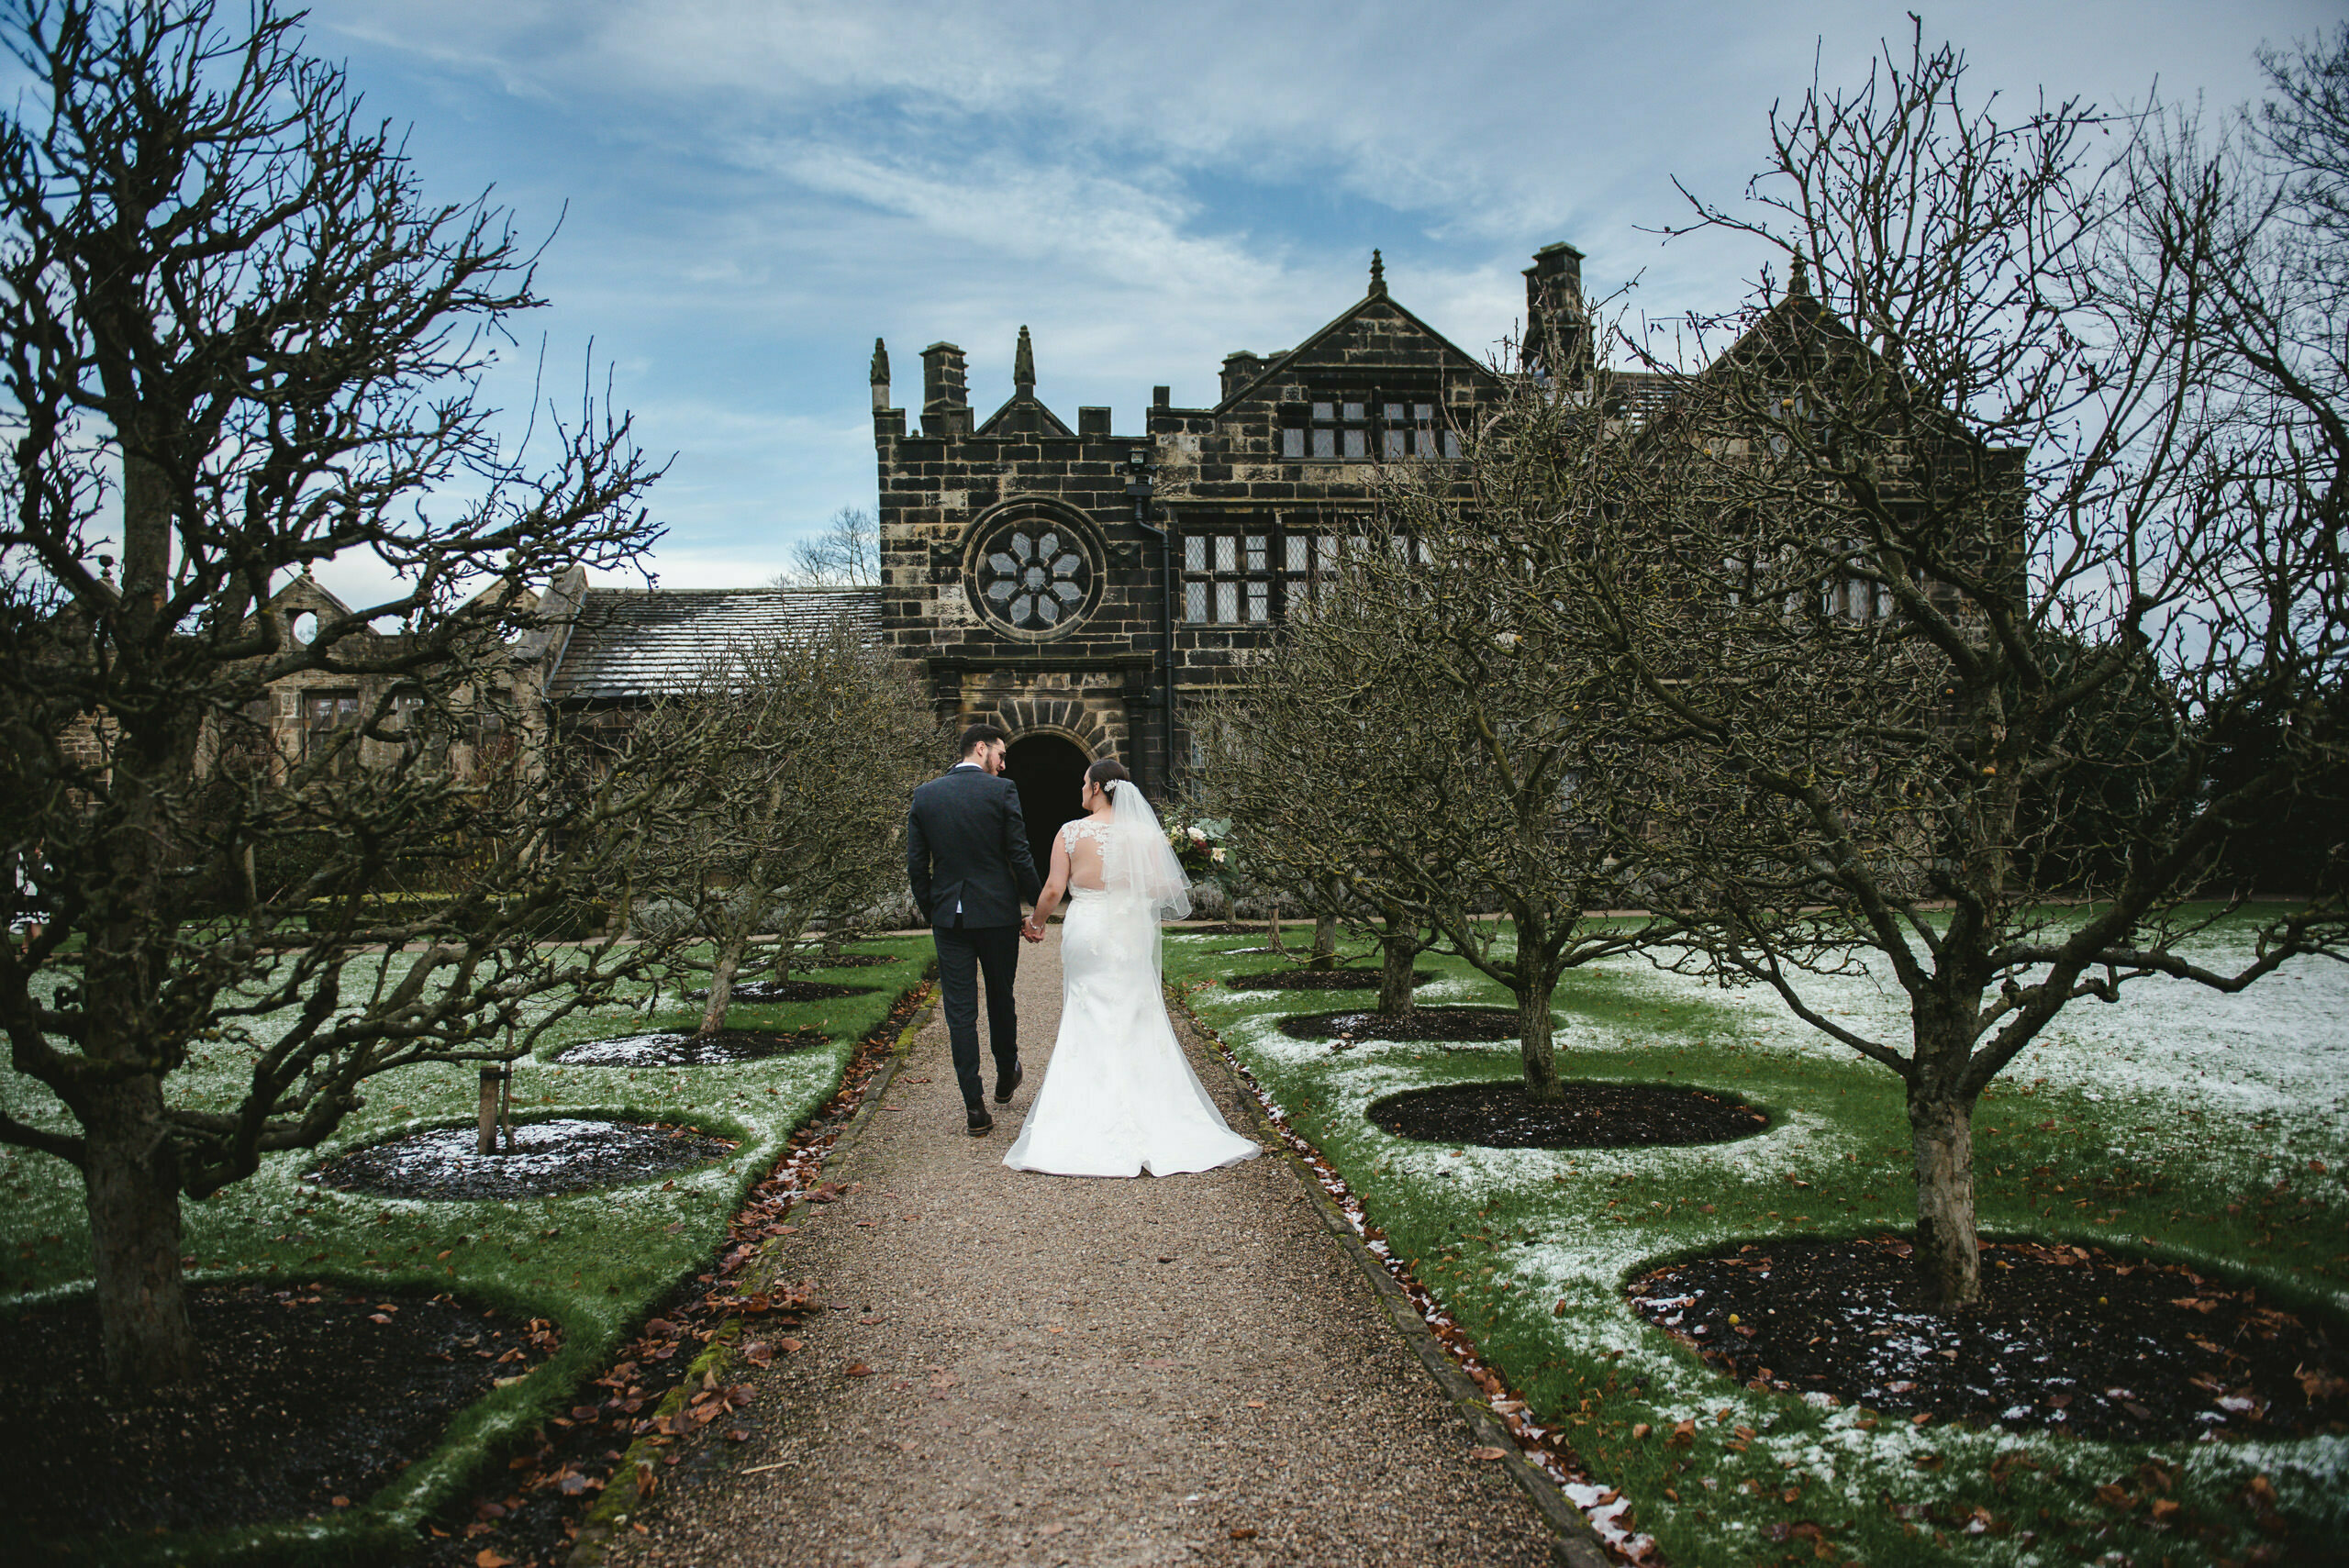 FEATURED East Riddlesden Hall Yorkshire 1 of 1 - Wedding photography at East Riddlesden Hall Barn 1